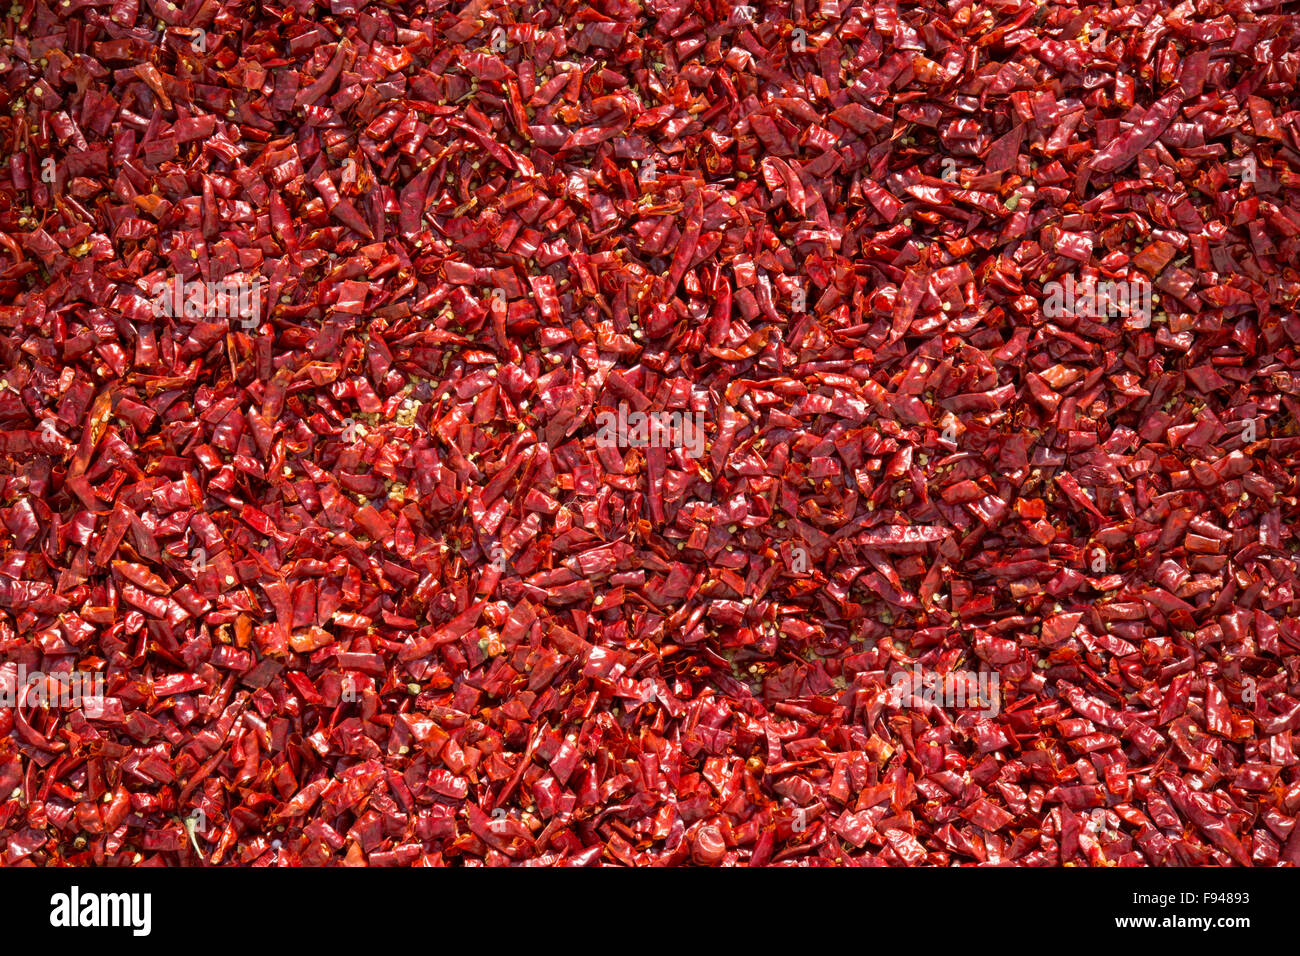 Red hot chili pepper background texture in the sun Stock Photo